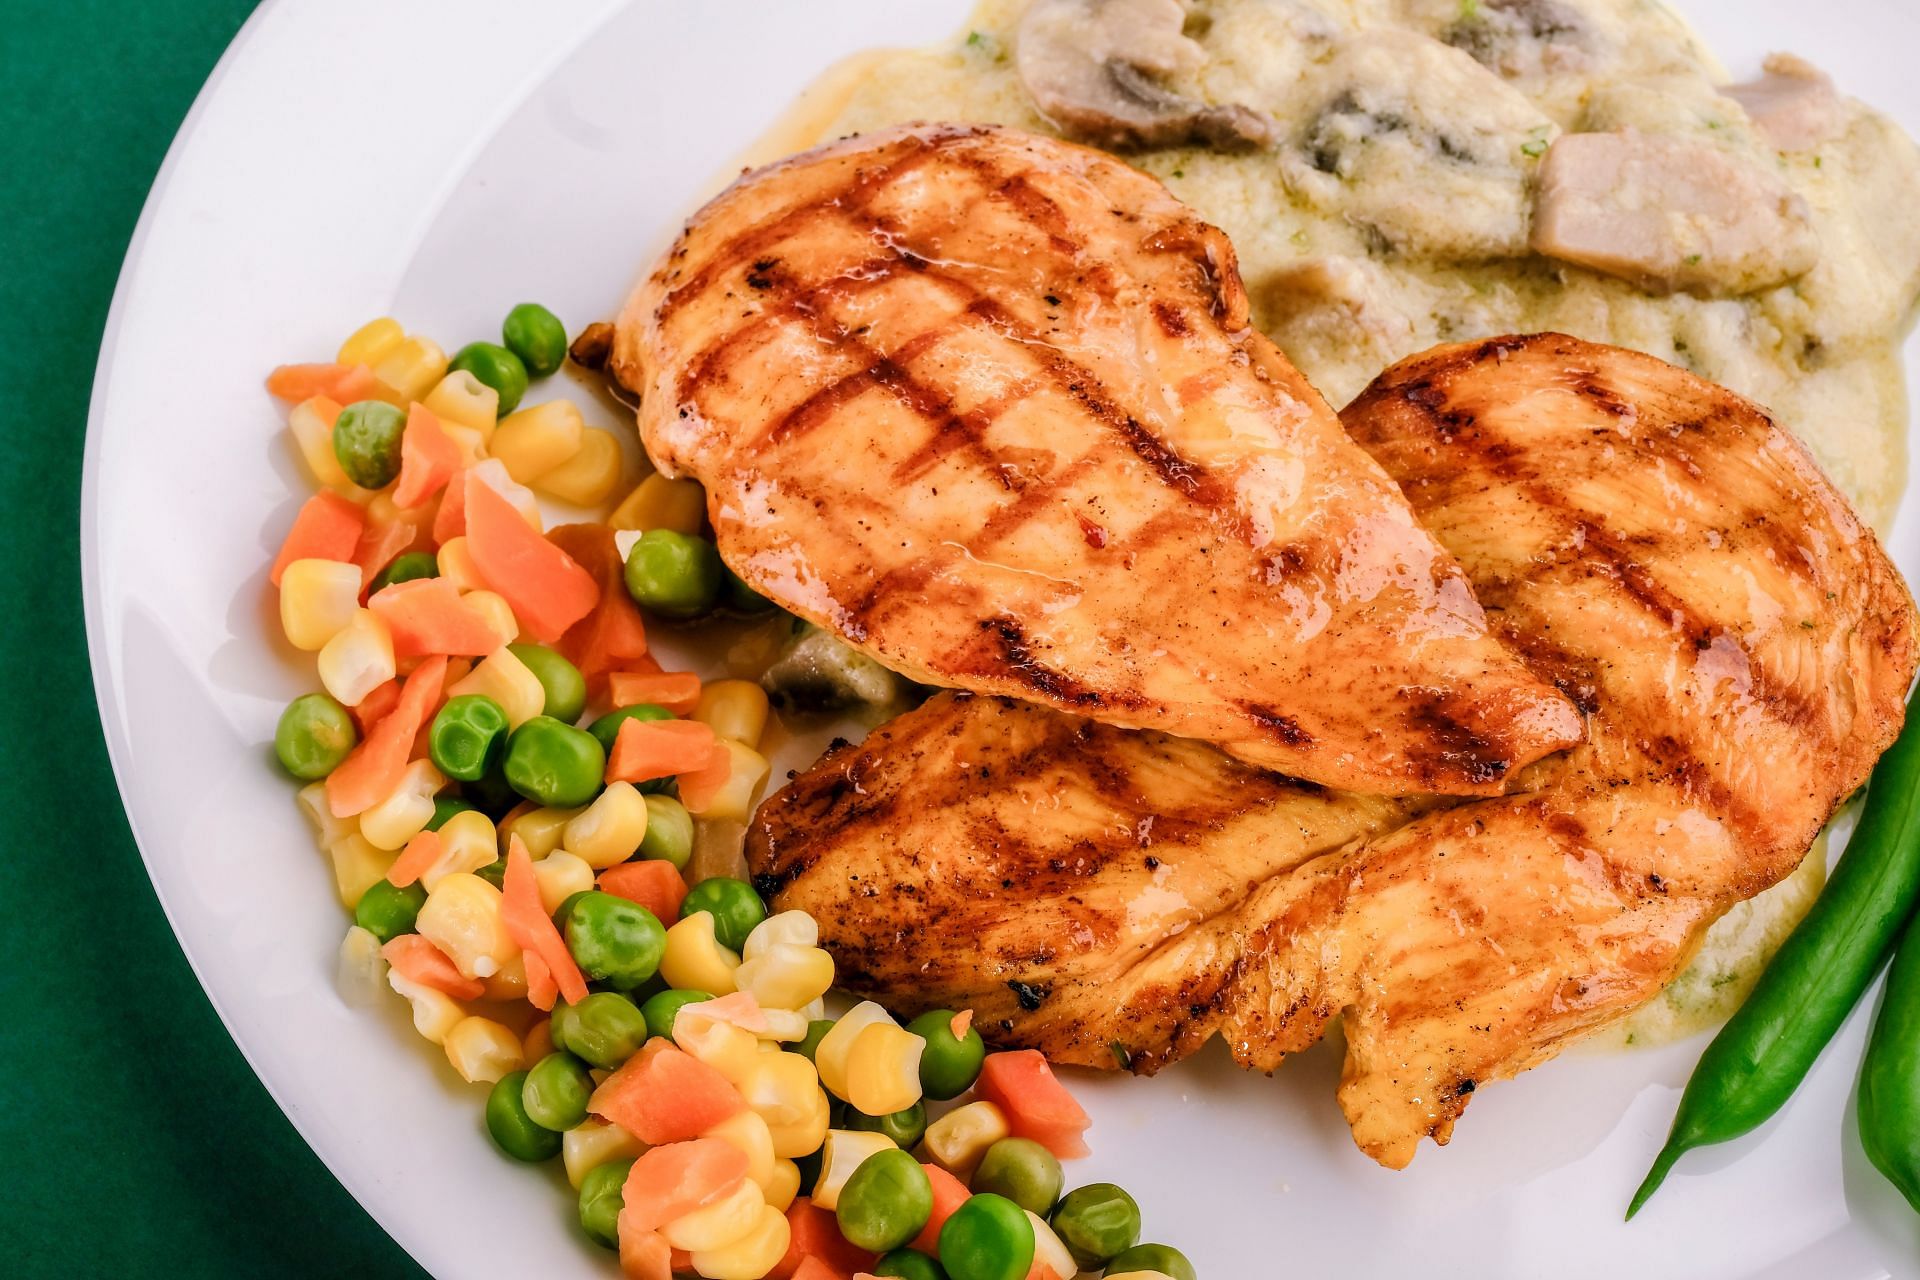 Grilled chicken breast is a great addition to a balanced diet. (Image via Unsplash/ Sam Khamseh)